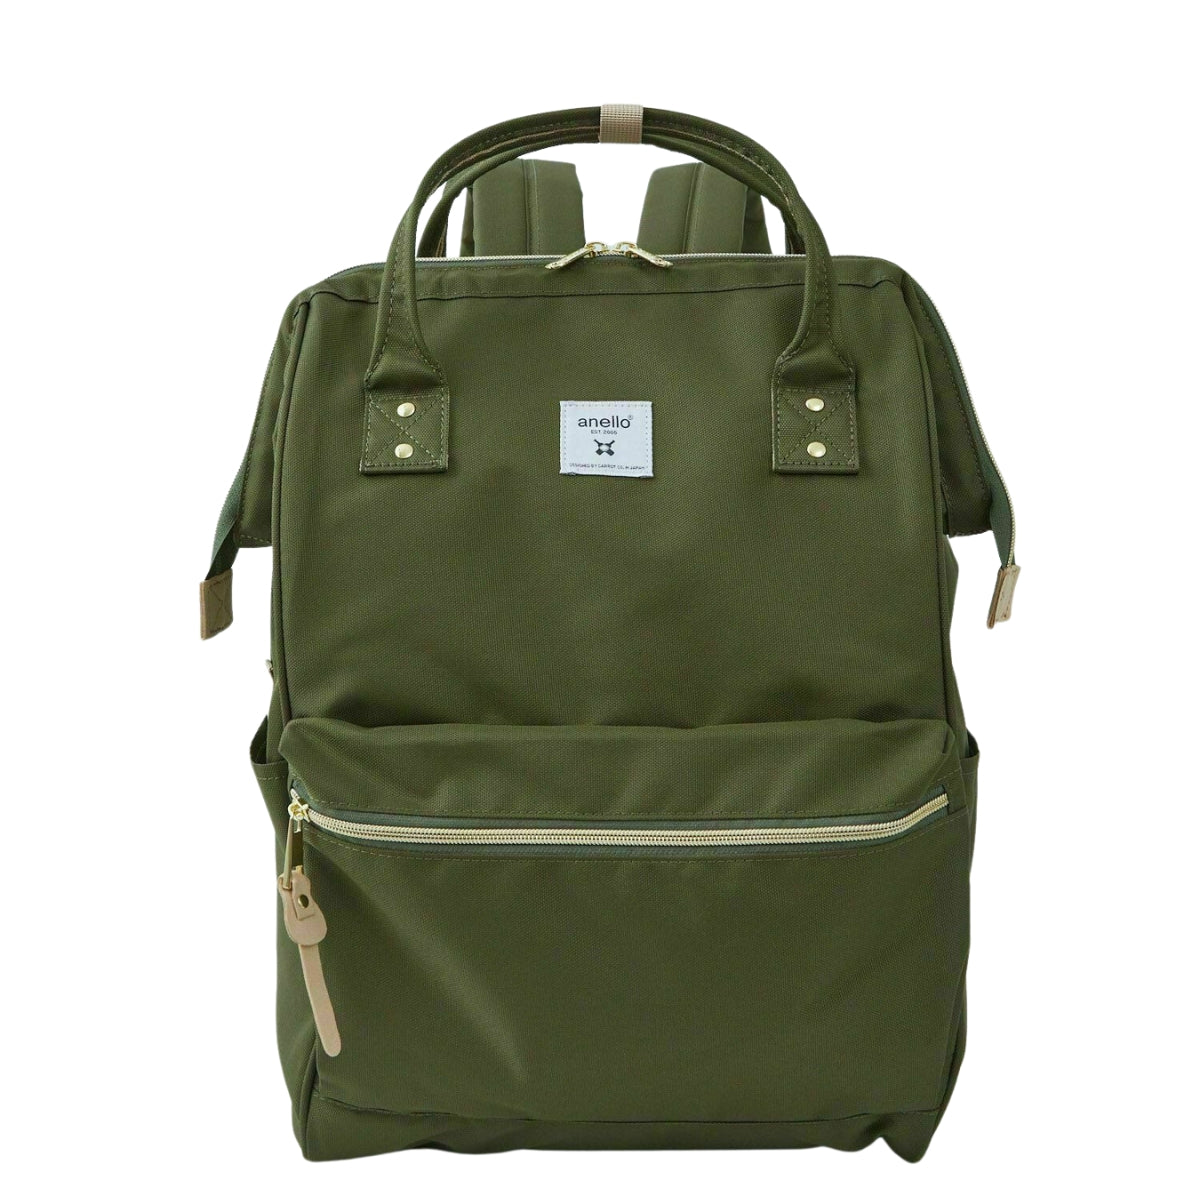 Anello Cross Bottle Backpack Large in Olive